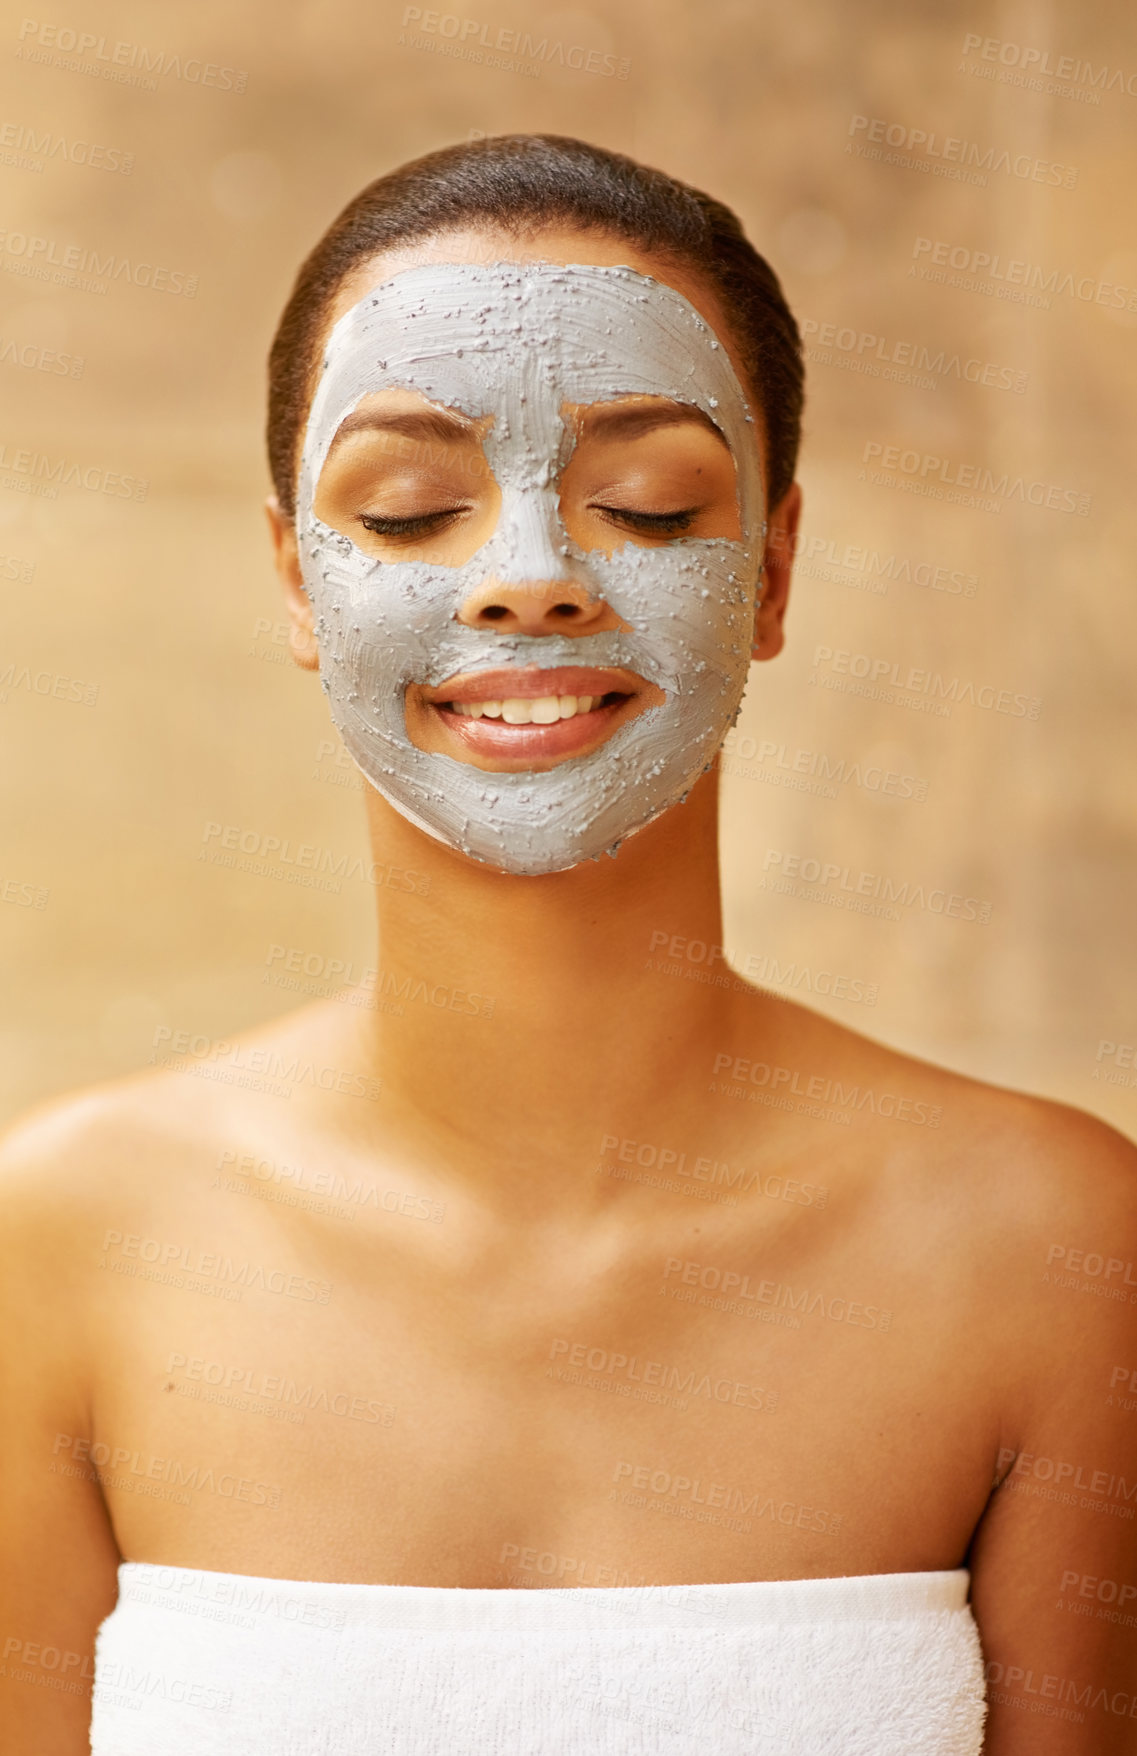 Buy stock photo Cropped shot of a young woman enjoying a skincare treatment at the spa